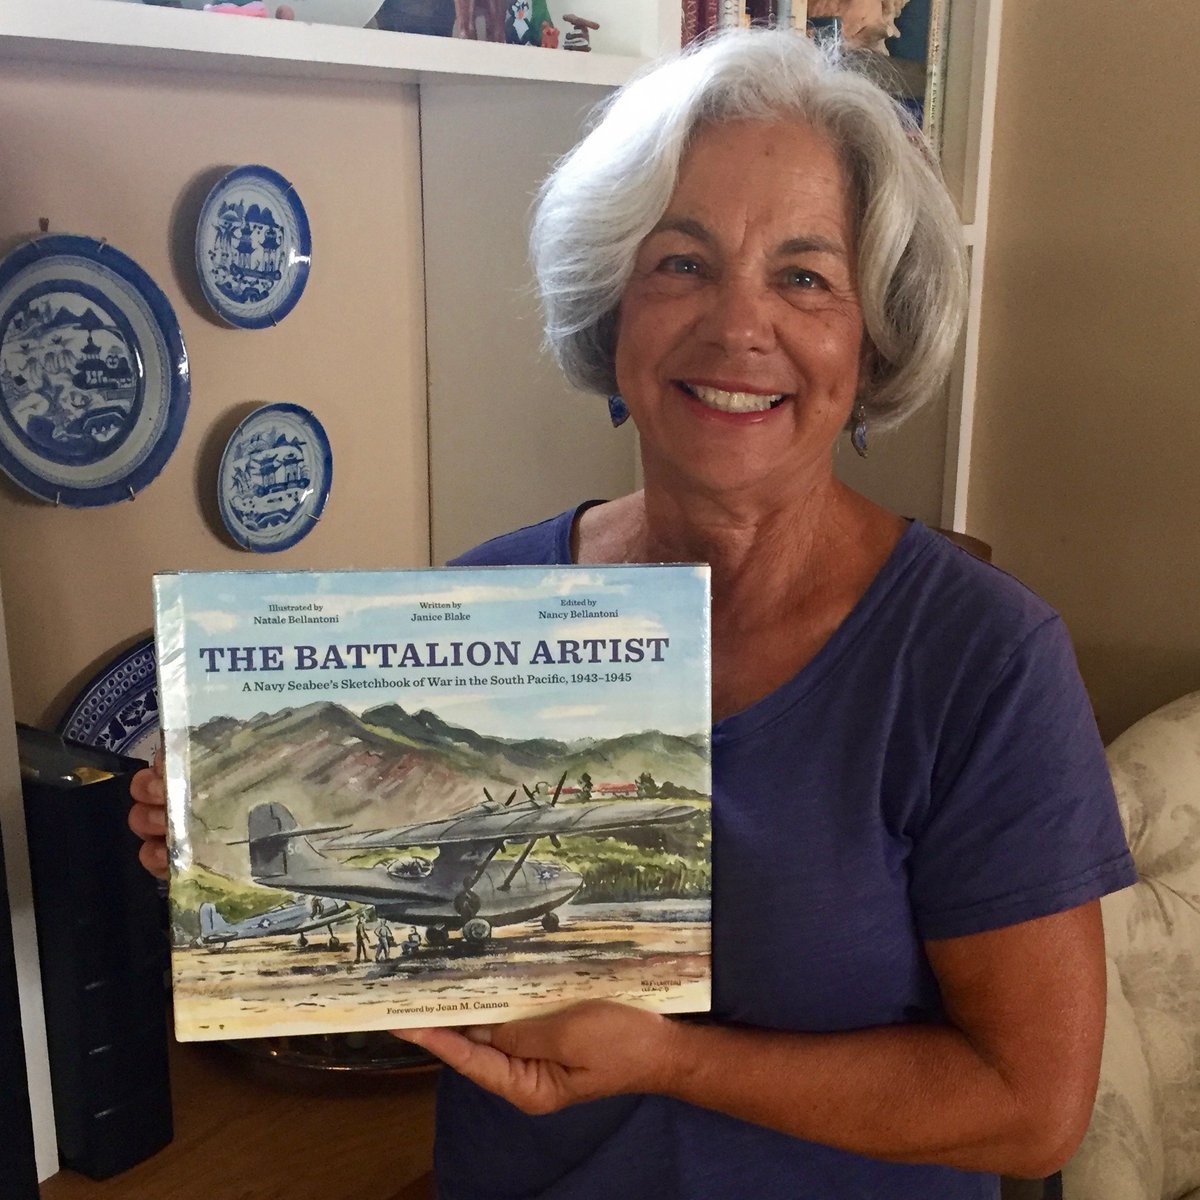 It was the dying wish of my friend and former colleague Nat Bellantoni to publish a book about the paintings and sketches he brought back from the Pacific/WWII. It was my privilege to do the research and writing. Nat served w USN 78th Construction Battalion. #HistoryWritersDay22